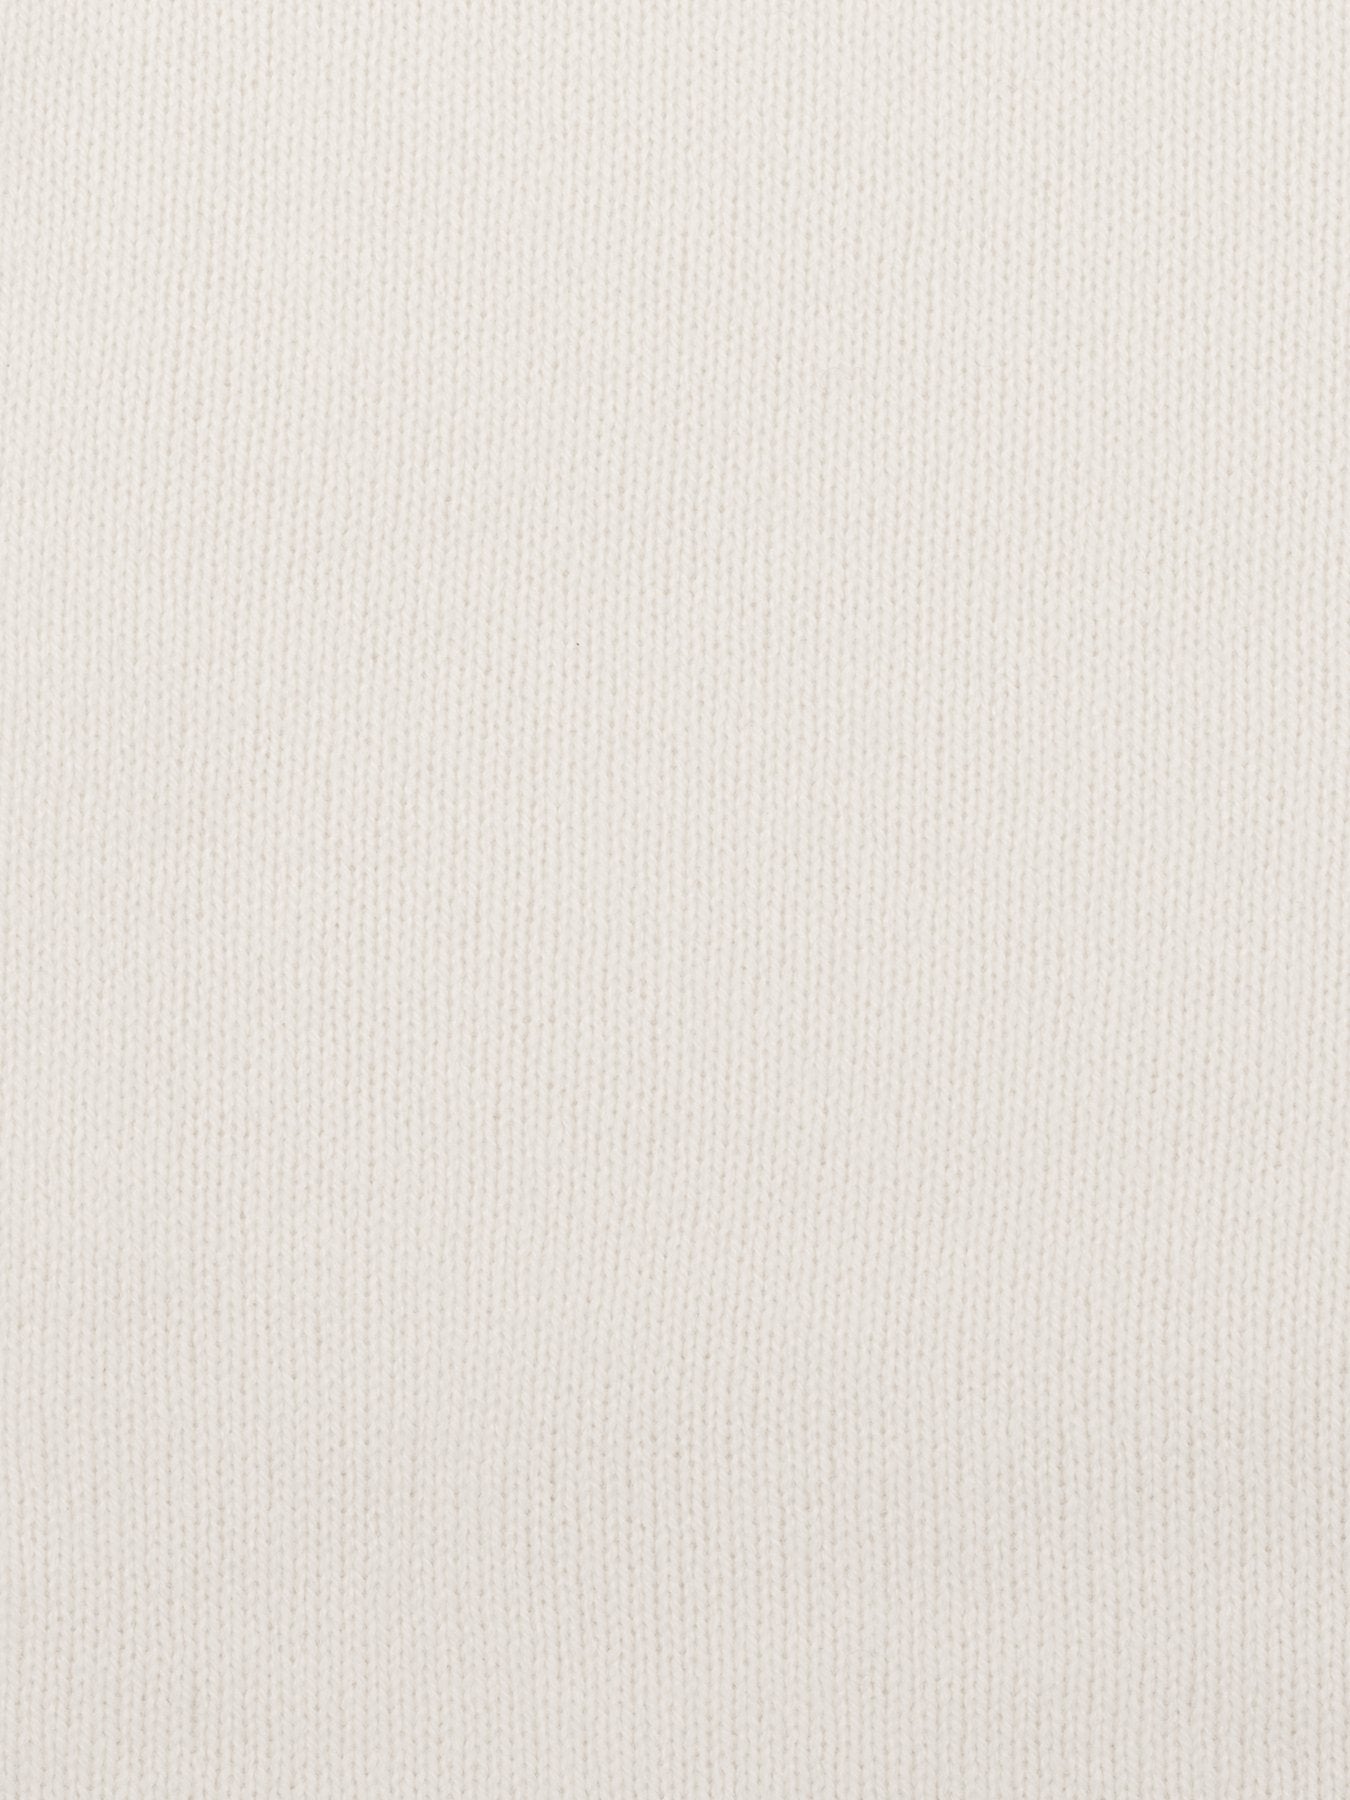 a swatch of plain single jersey knitting made from fine merino wool in a white colour